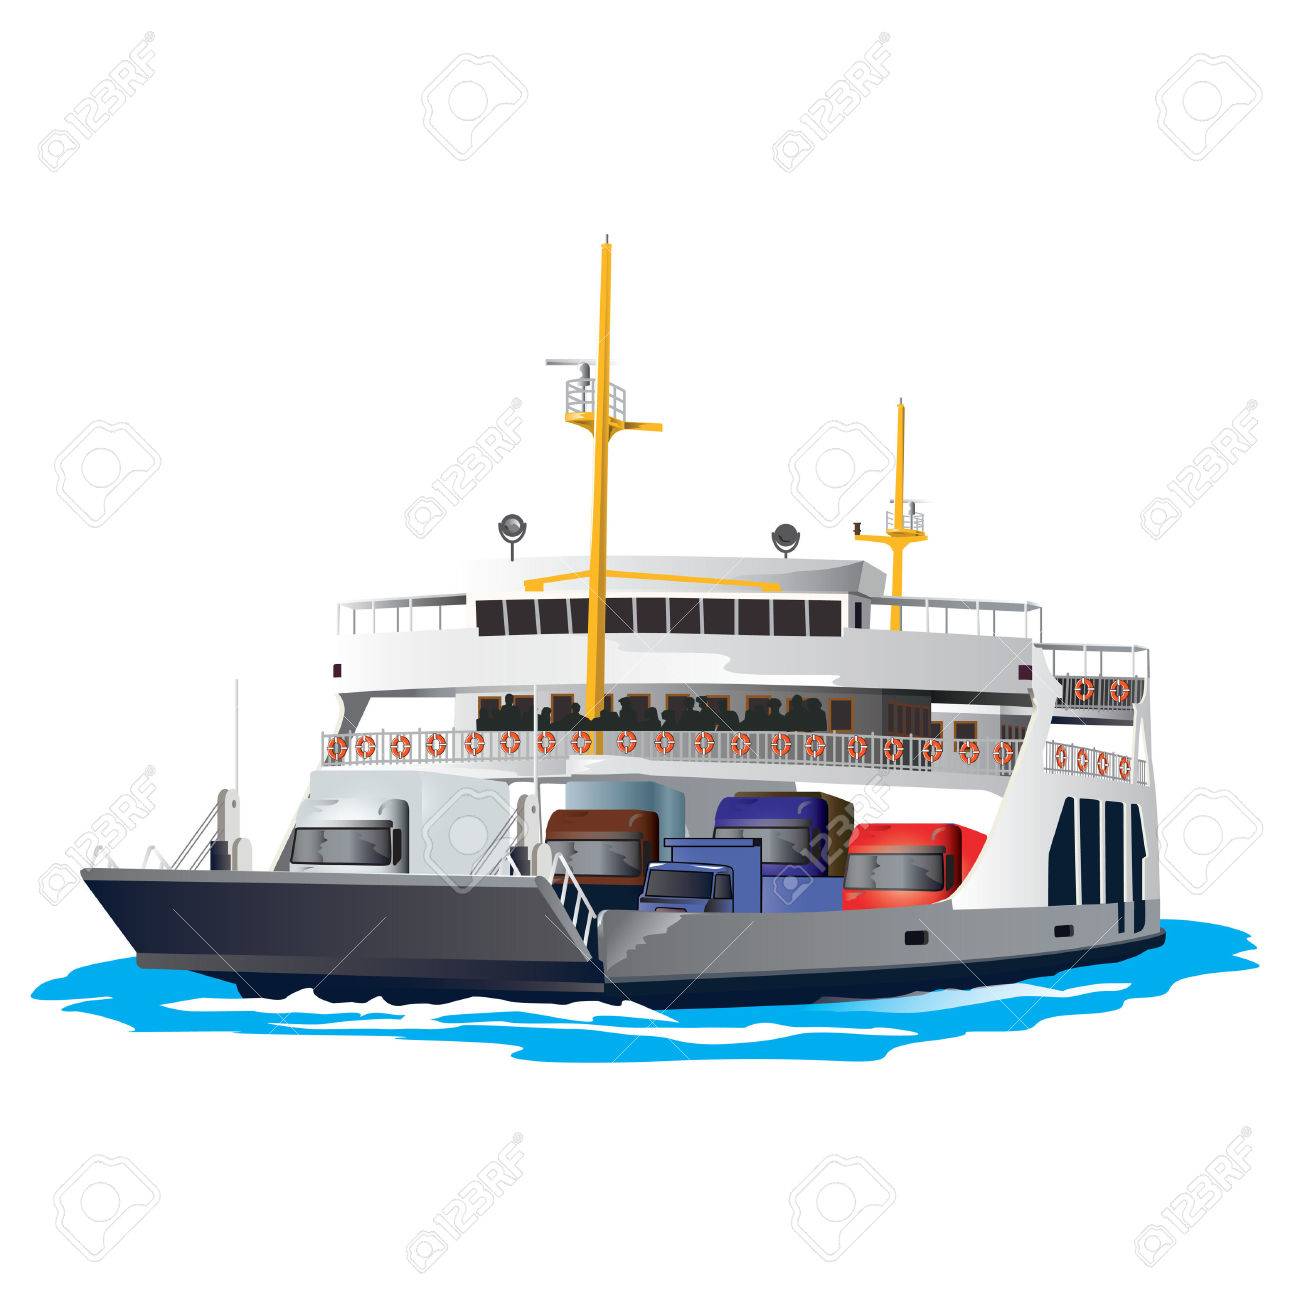 Ferry boat clipart